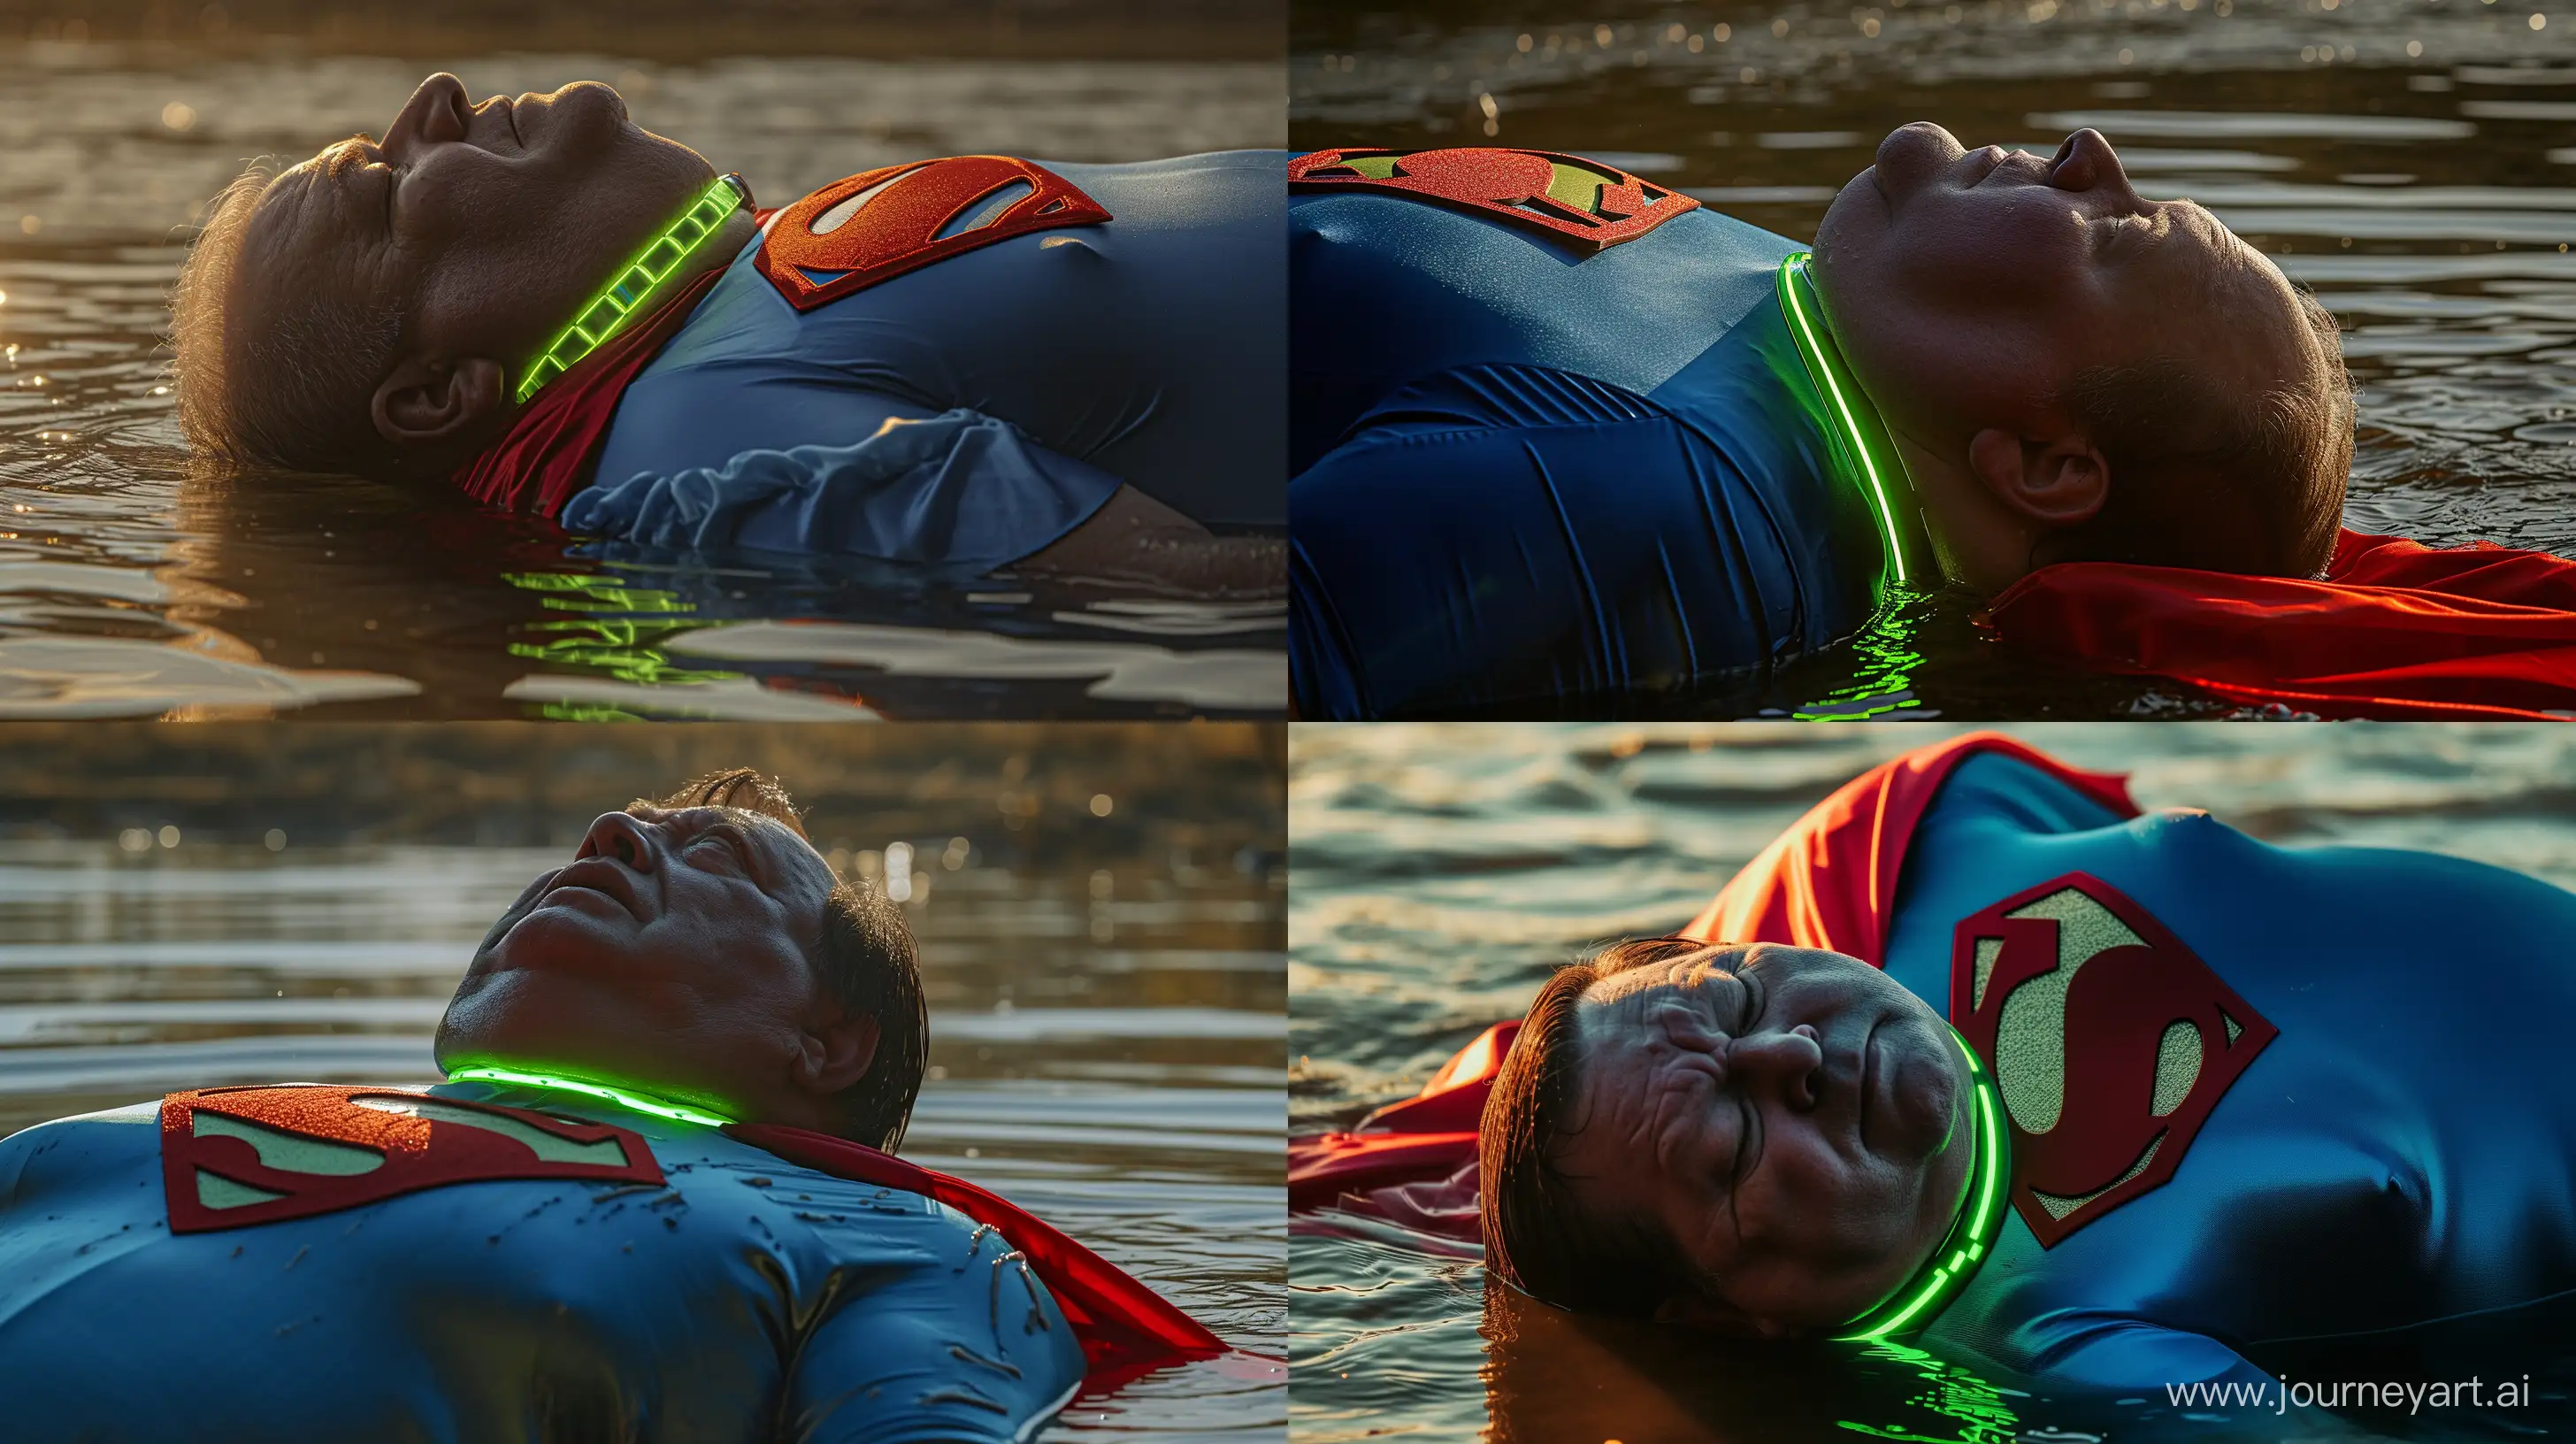 Elderly-Superman-Submerged-Quirky-Portrait-of-a-Mature-Man-in-Costume